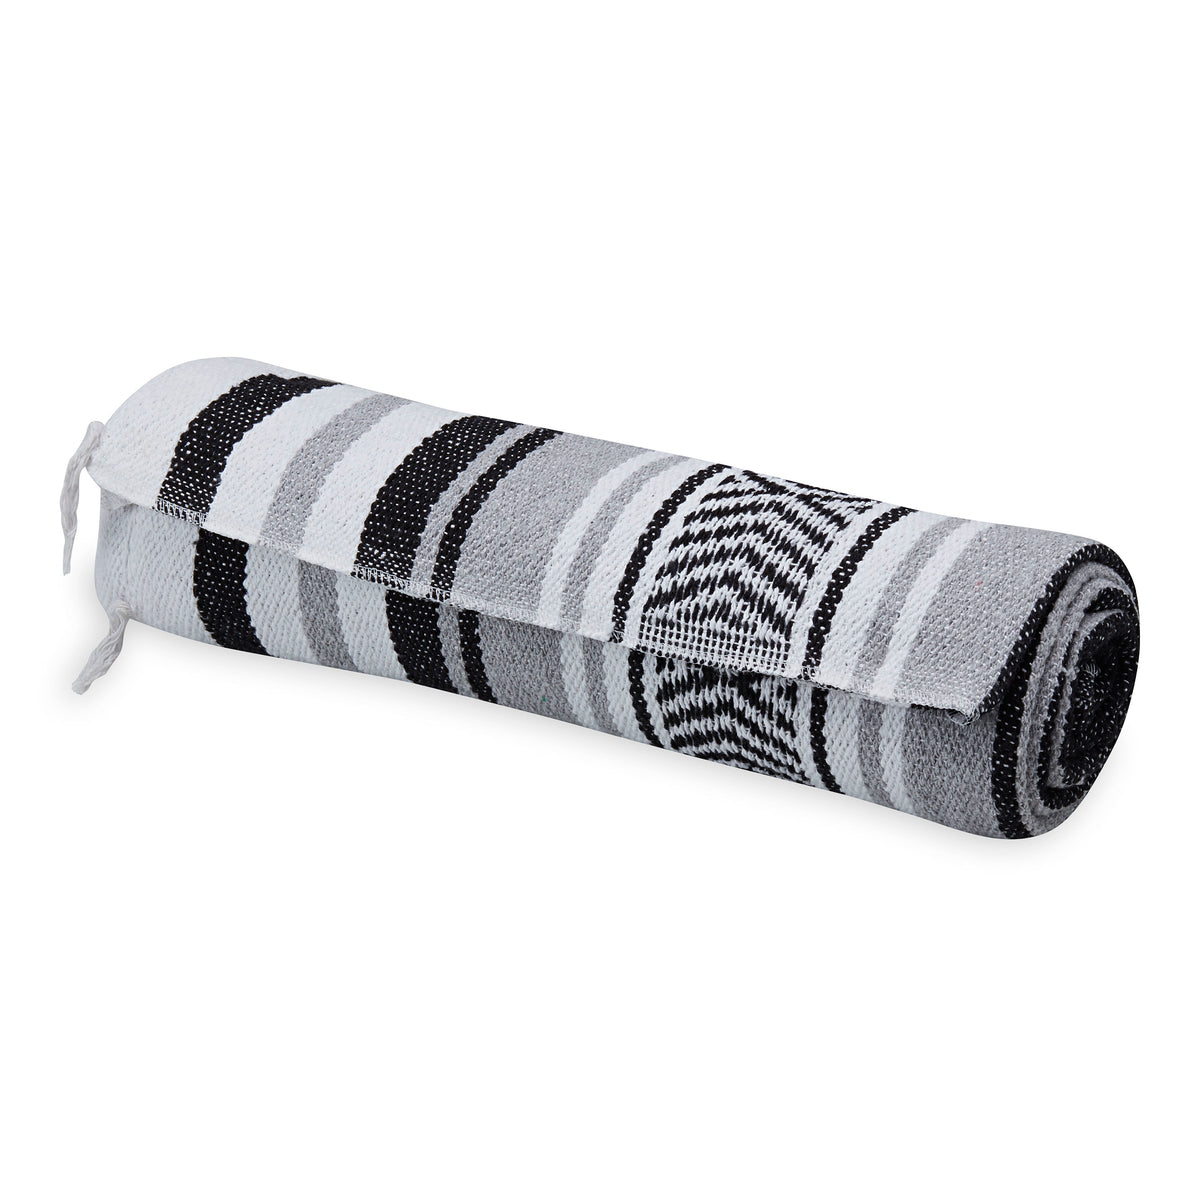 Traditional Mexican Woven Blanket grey black rolled up